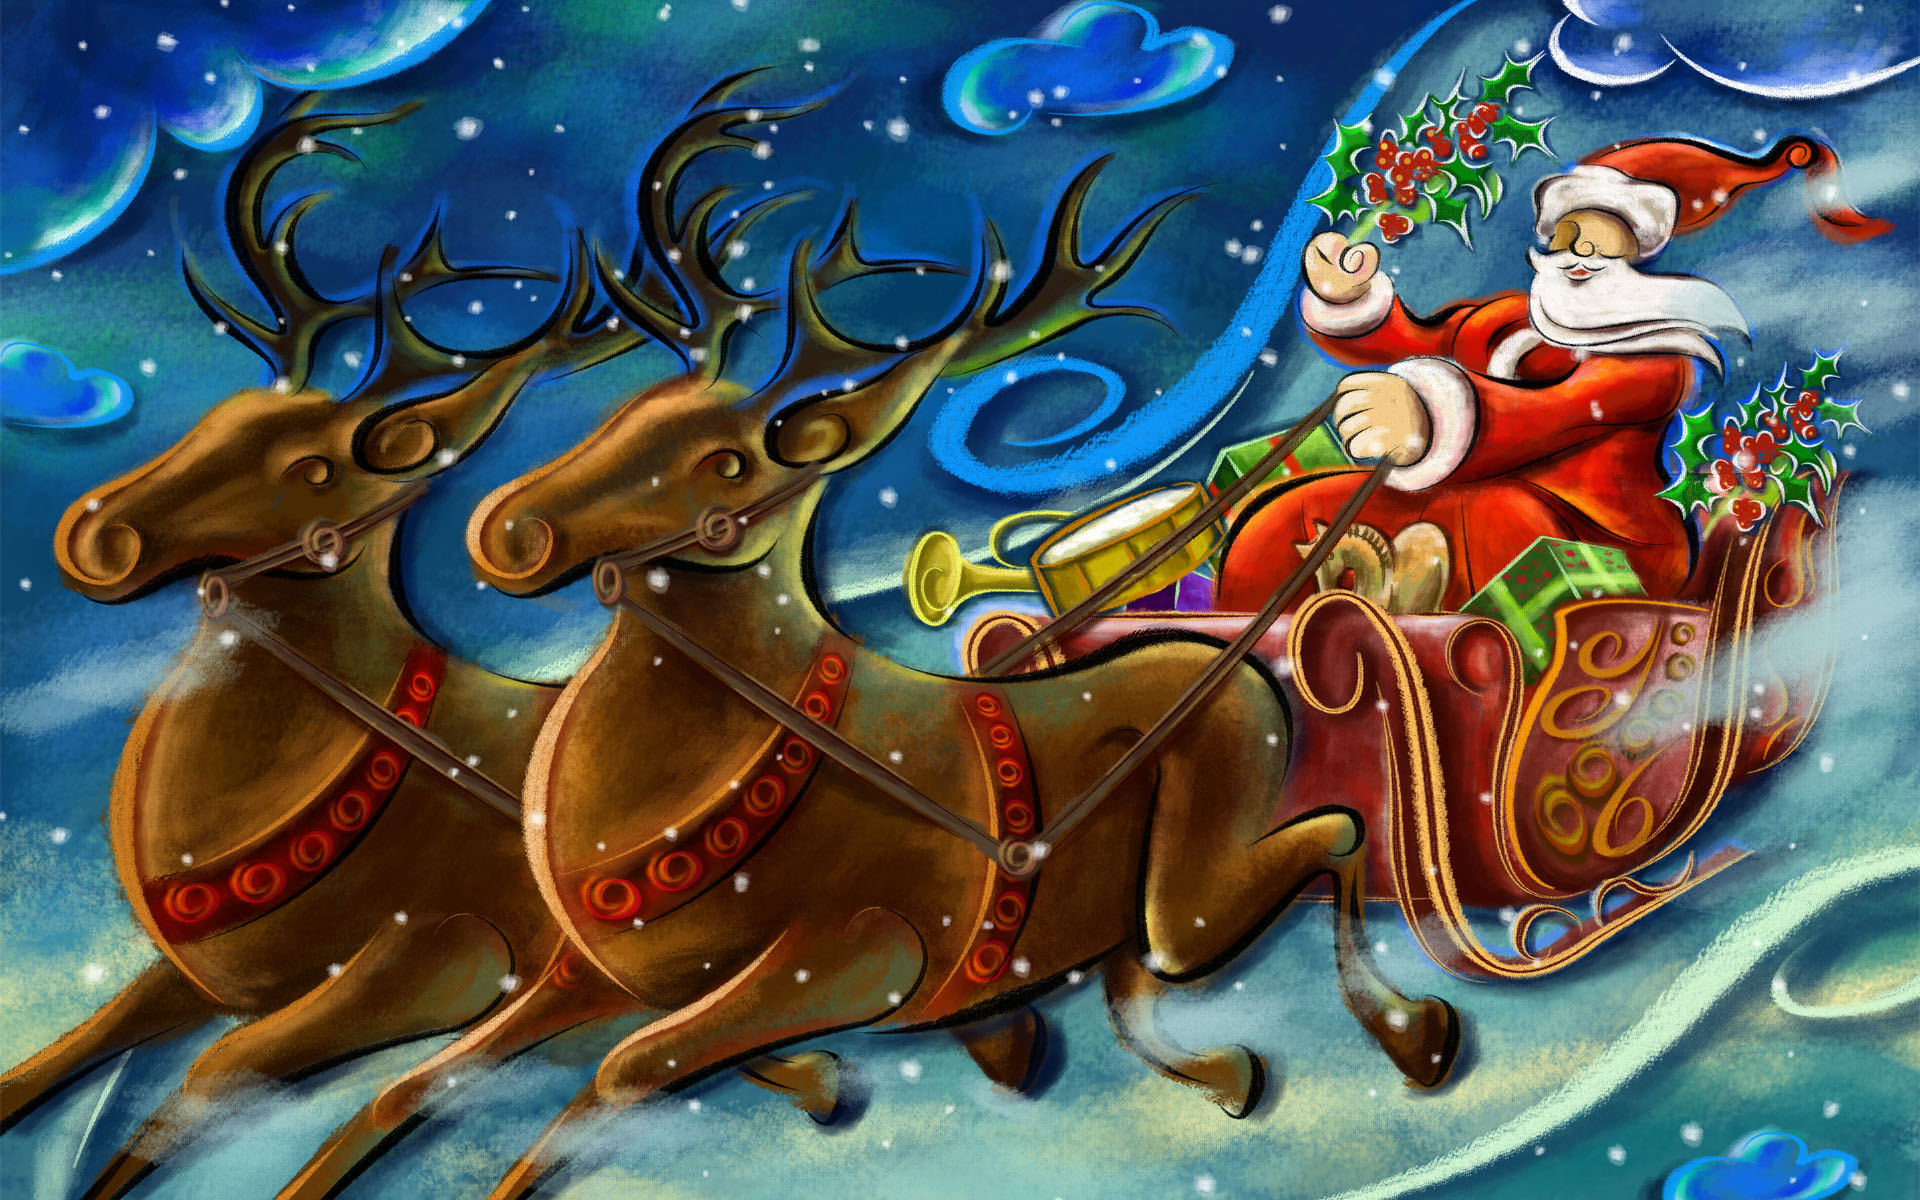 Santa Claus With Reindeers High Definition Wallpaper Image 2014